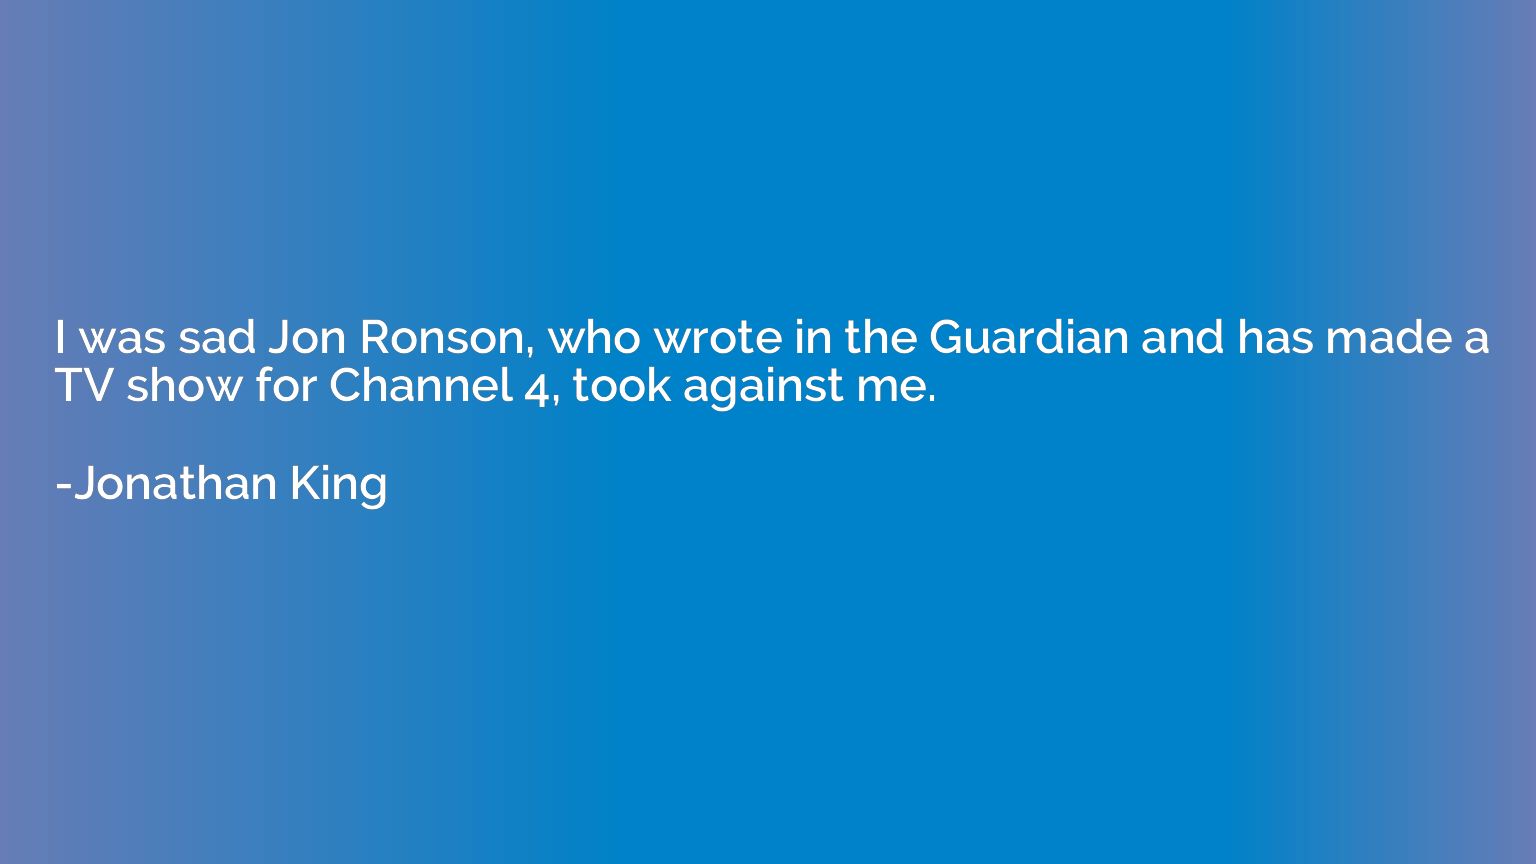 I was sad Jon Ronson, who wrote in the Guardian and has made